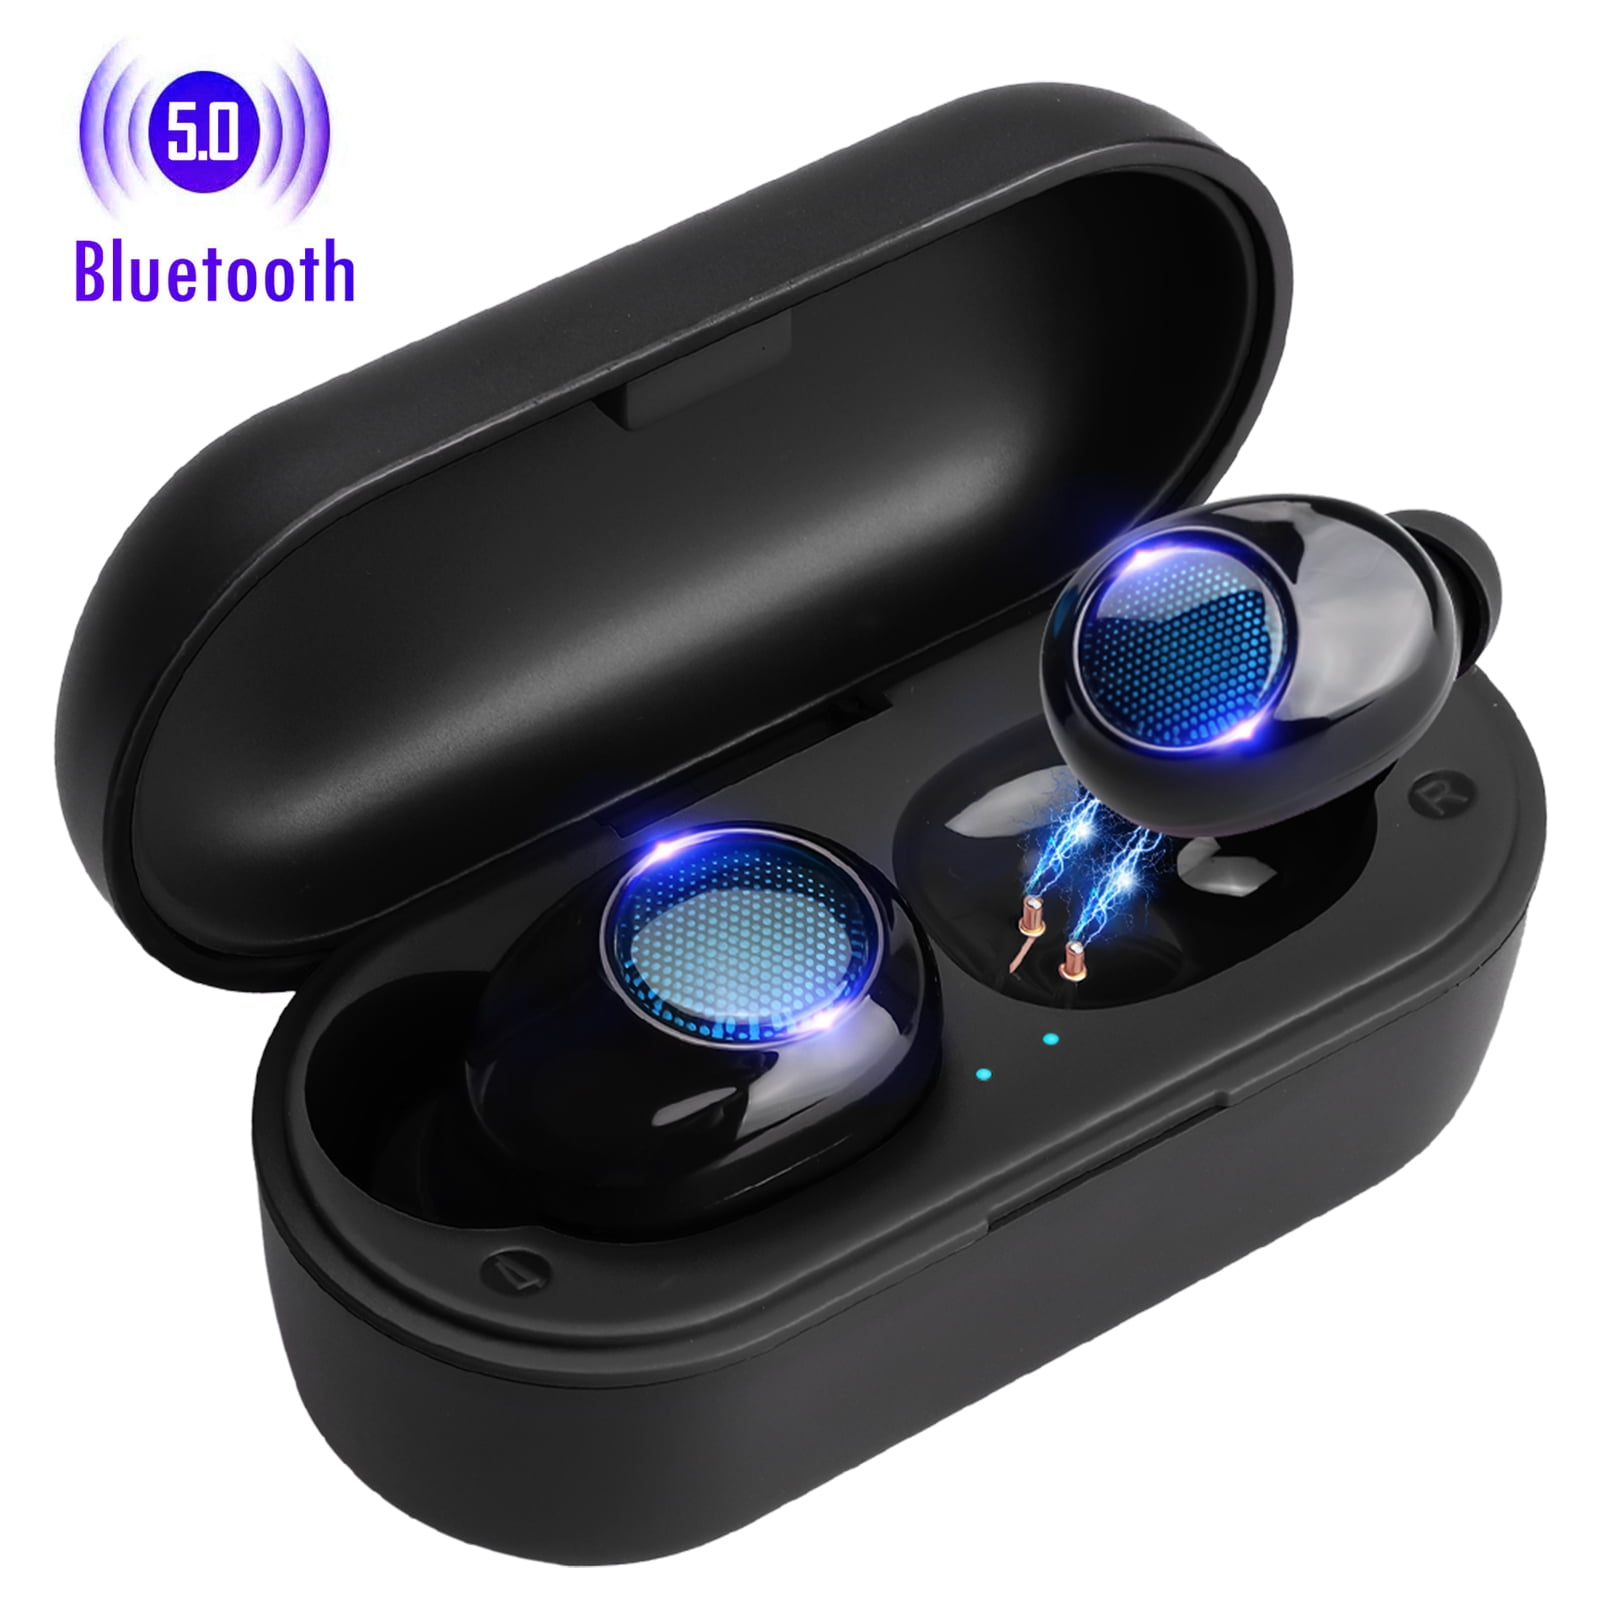 Wireless Earbuds, EEEKit Bluetooth 5.0 Headphones IPX7 Waterproof Earbuds, 30Hrs Playtime, in Ear Headset with Mic, Deep Bass 3D Stereo Sound, Noise Canceling, for Sports Work Out, Easy Pairing